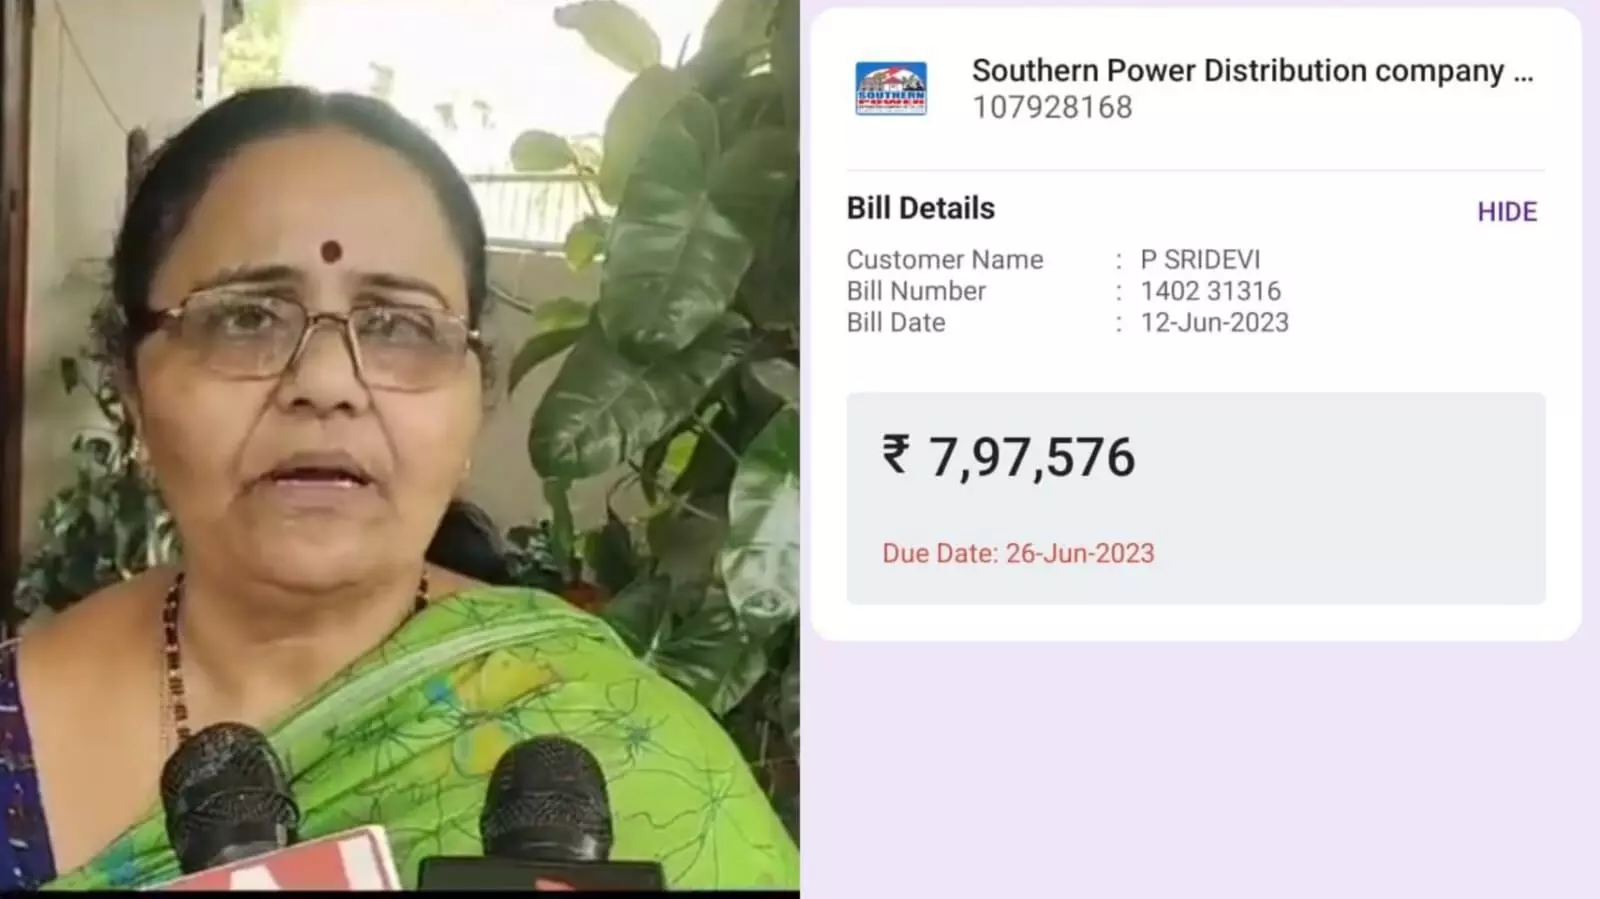 Slapped with Rs 7.97 lakh power bill, Uppal house owner goes through harrowing experience